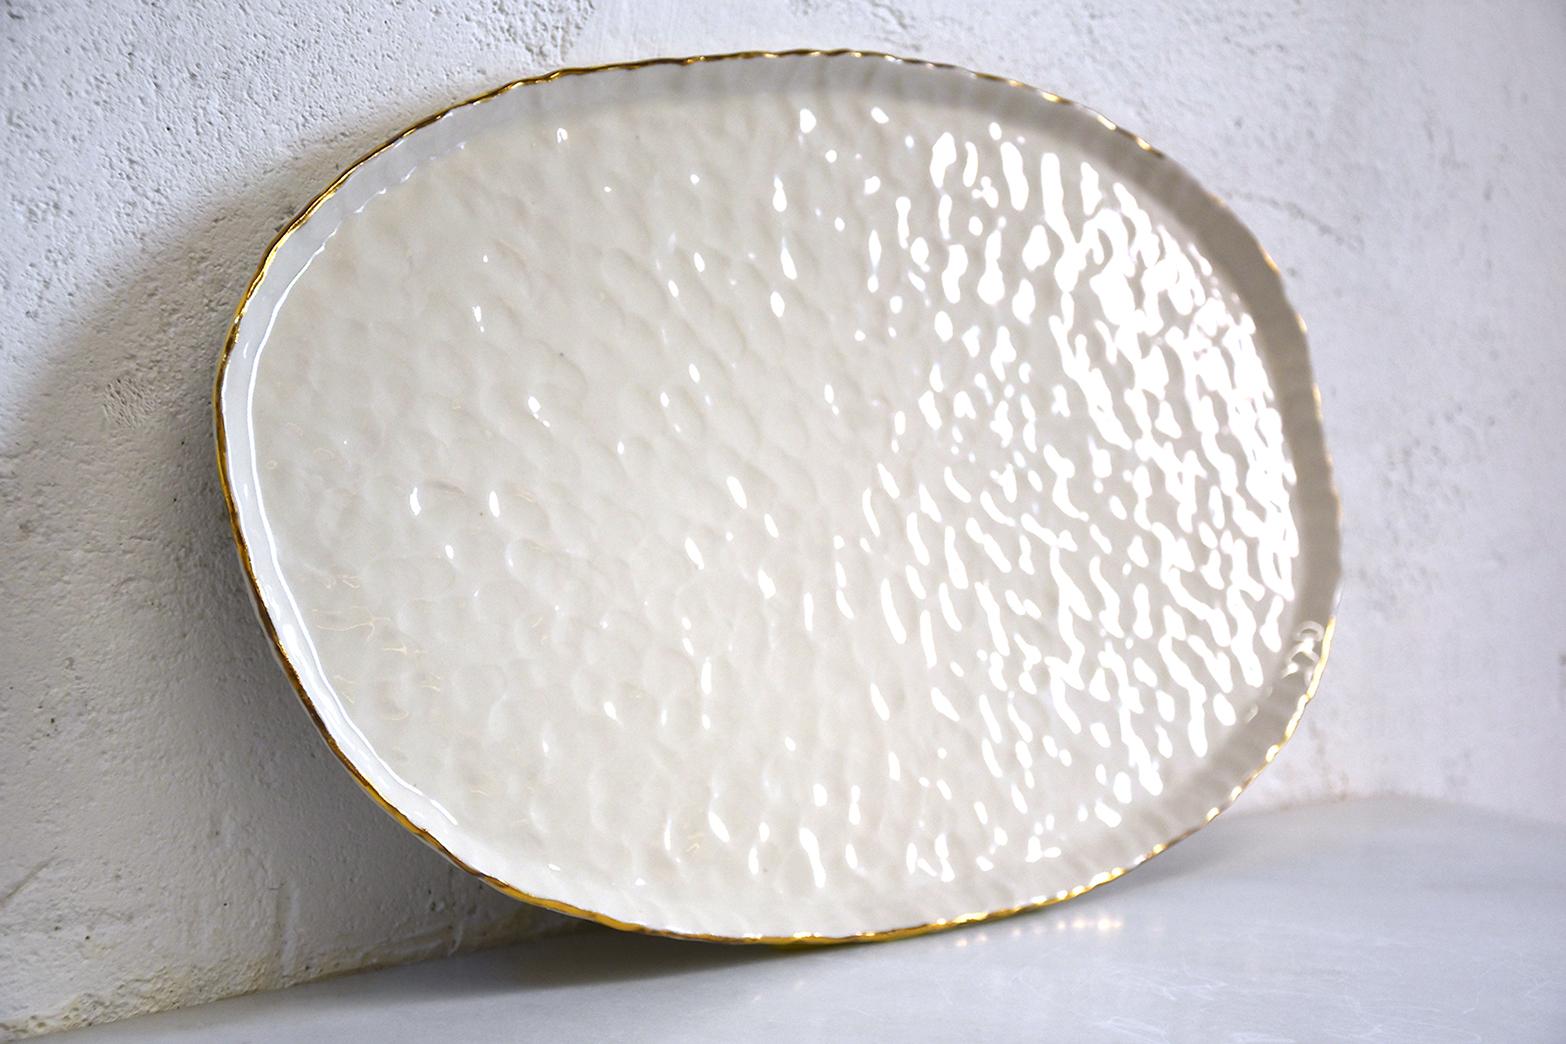 This pinched white porcelain plate by Isabel Halley was made specifically for Challah but can be used as a decorative platter for anything you would like to enjoy. Each platter is made by hand and no two are exactly alike. 22-karat gold luster